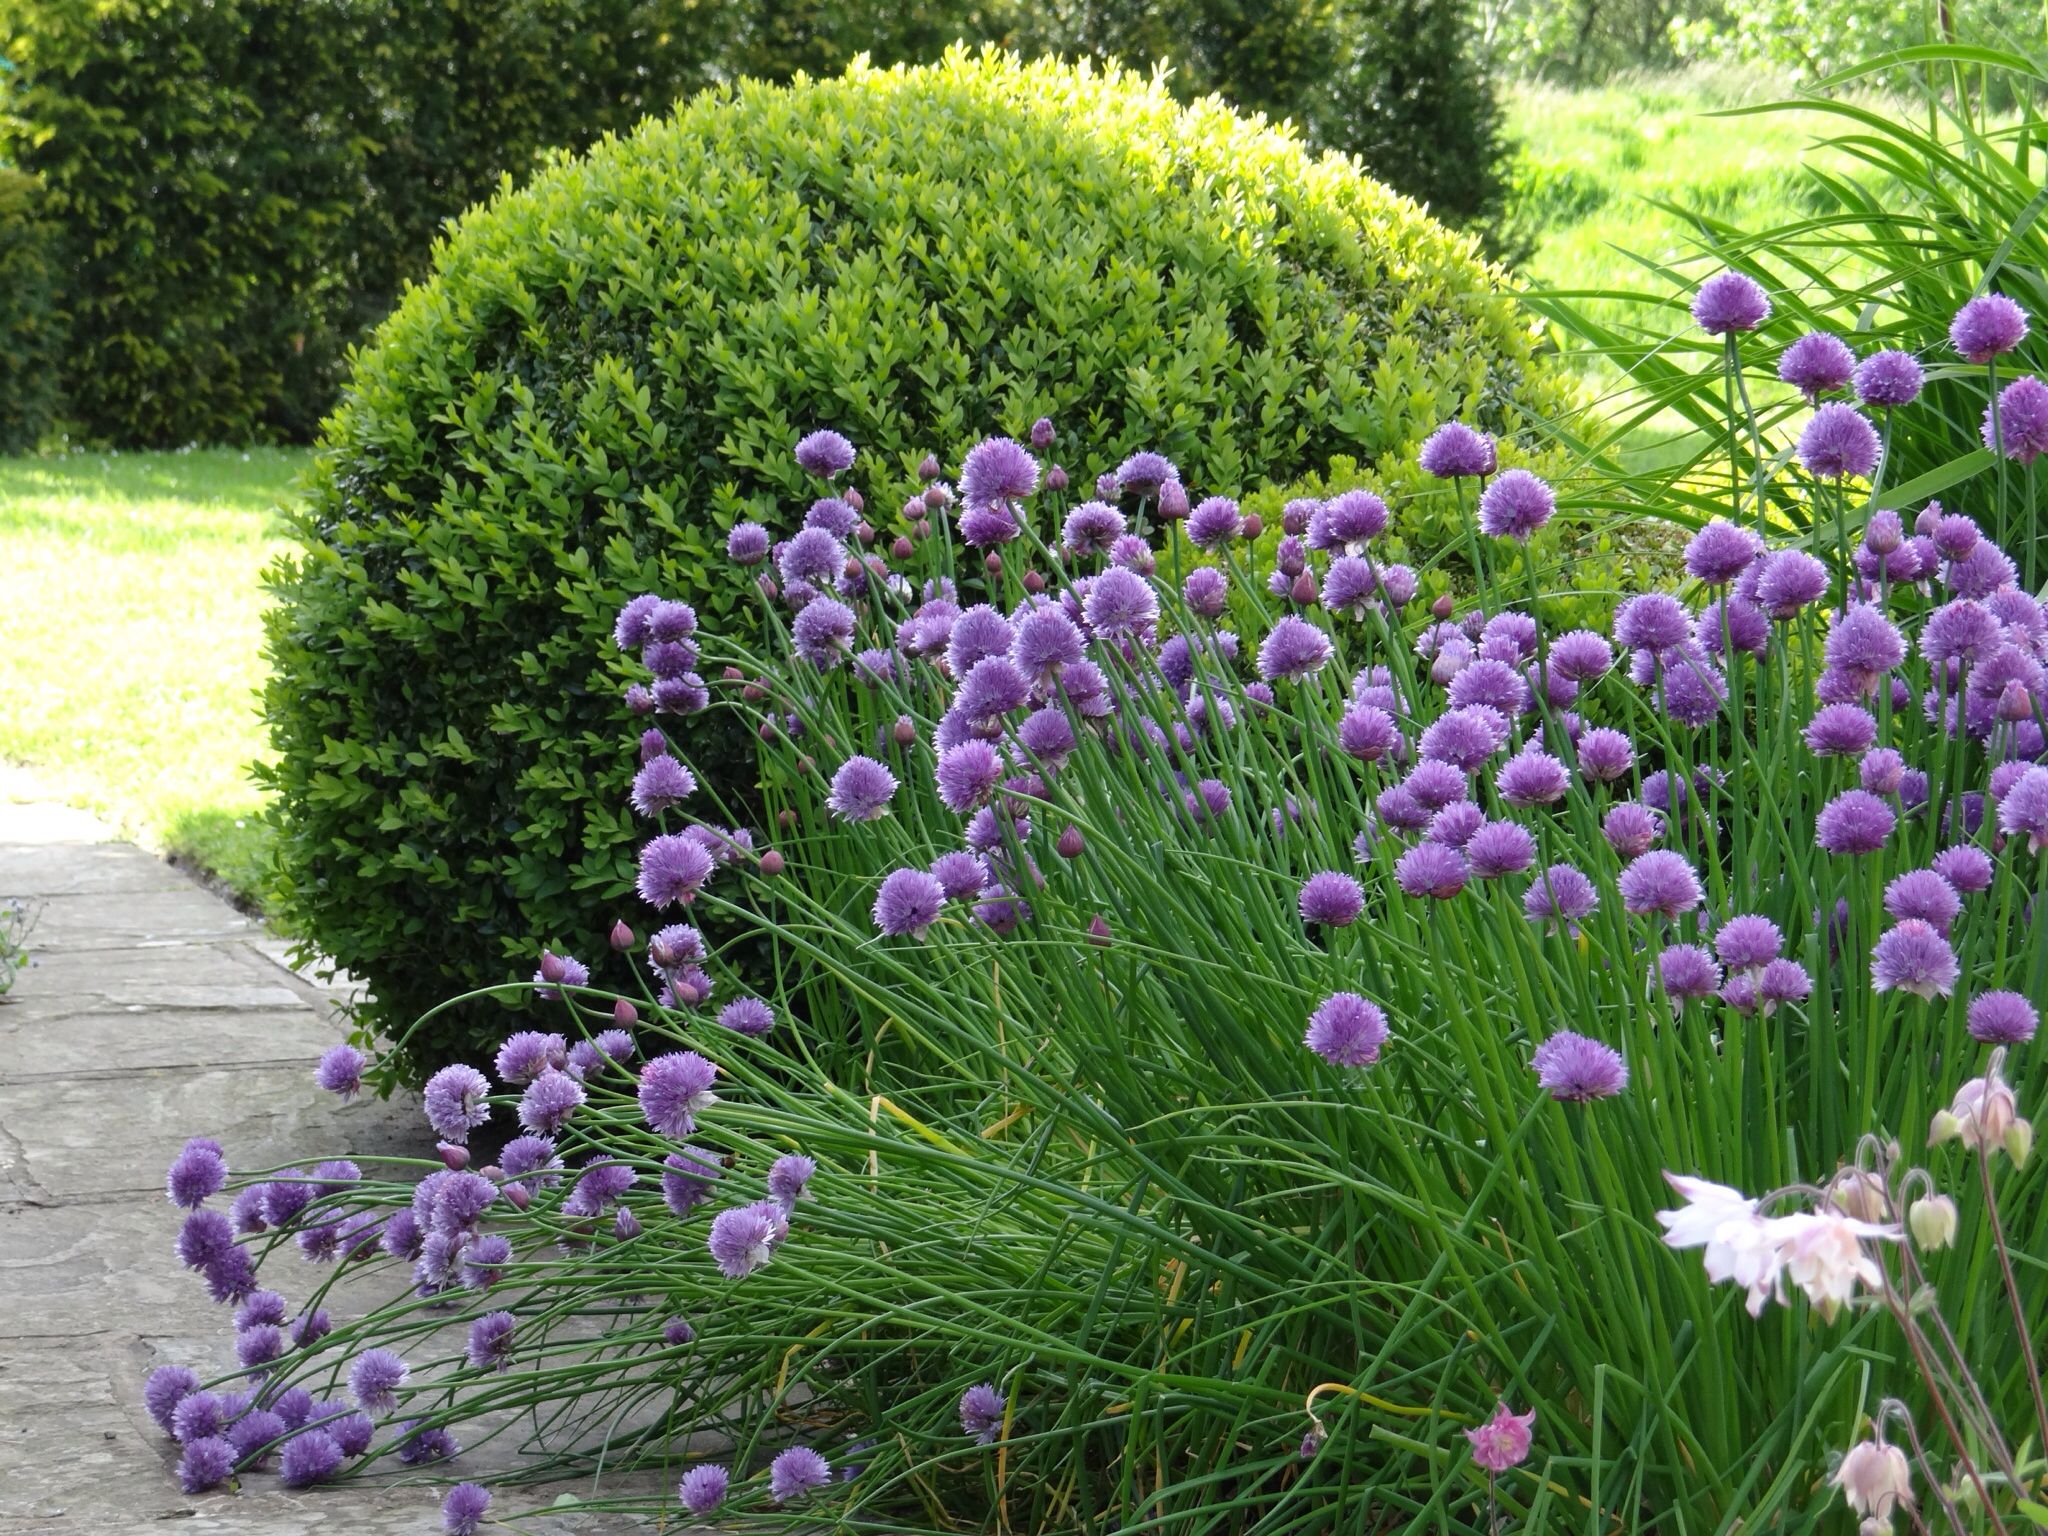 Gartencenter Best Of Small area Of Planting Alliums Against Buxus In Cottage